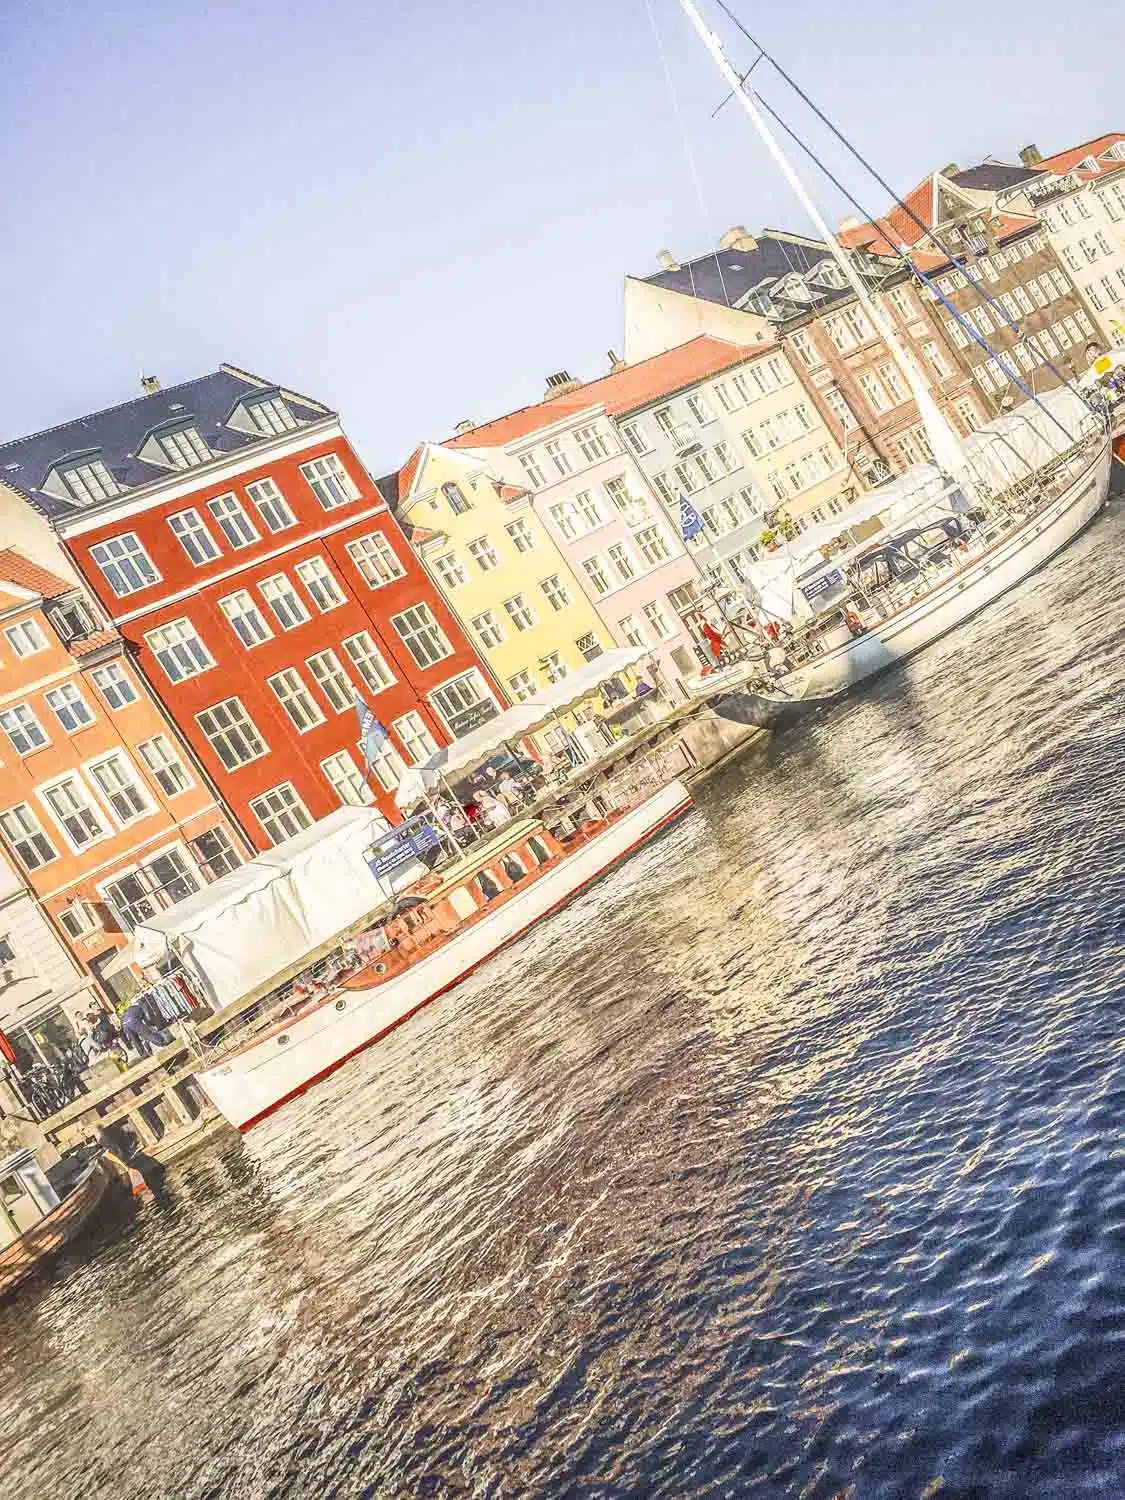 Colourful Nyhavn